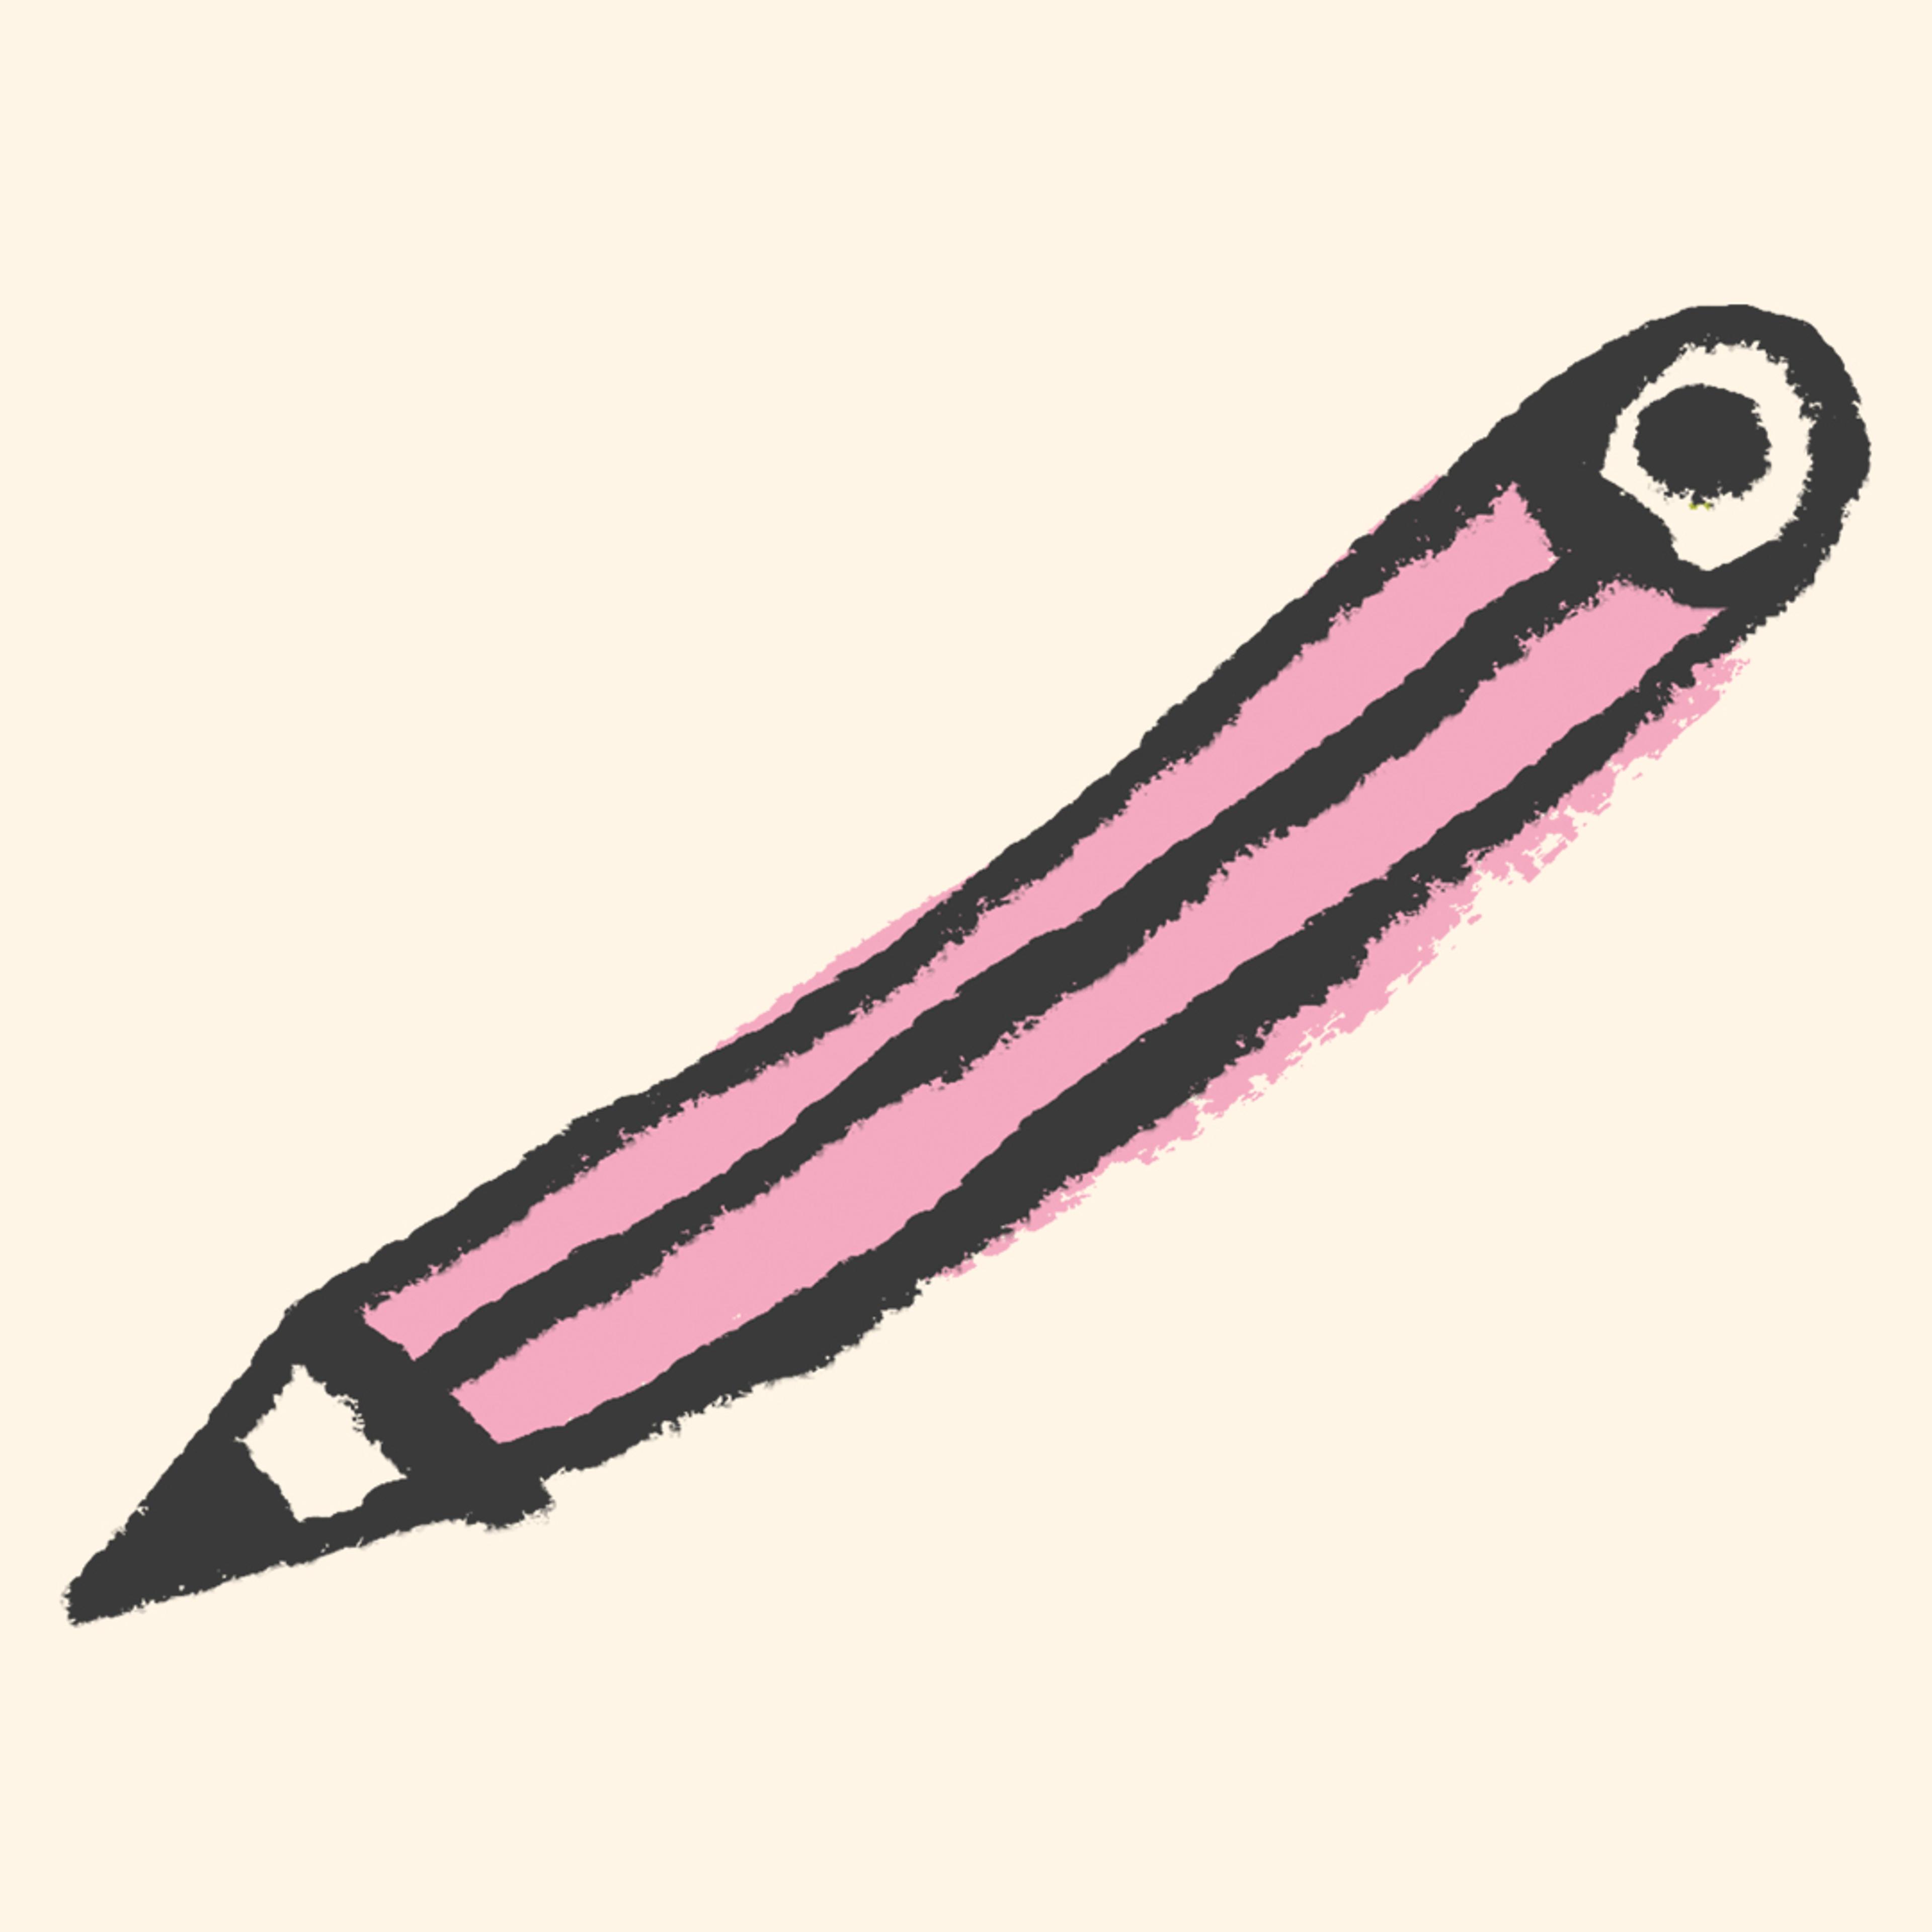 Illustration of a pink pencil on a beige background.